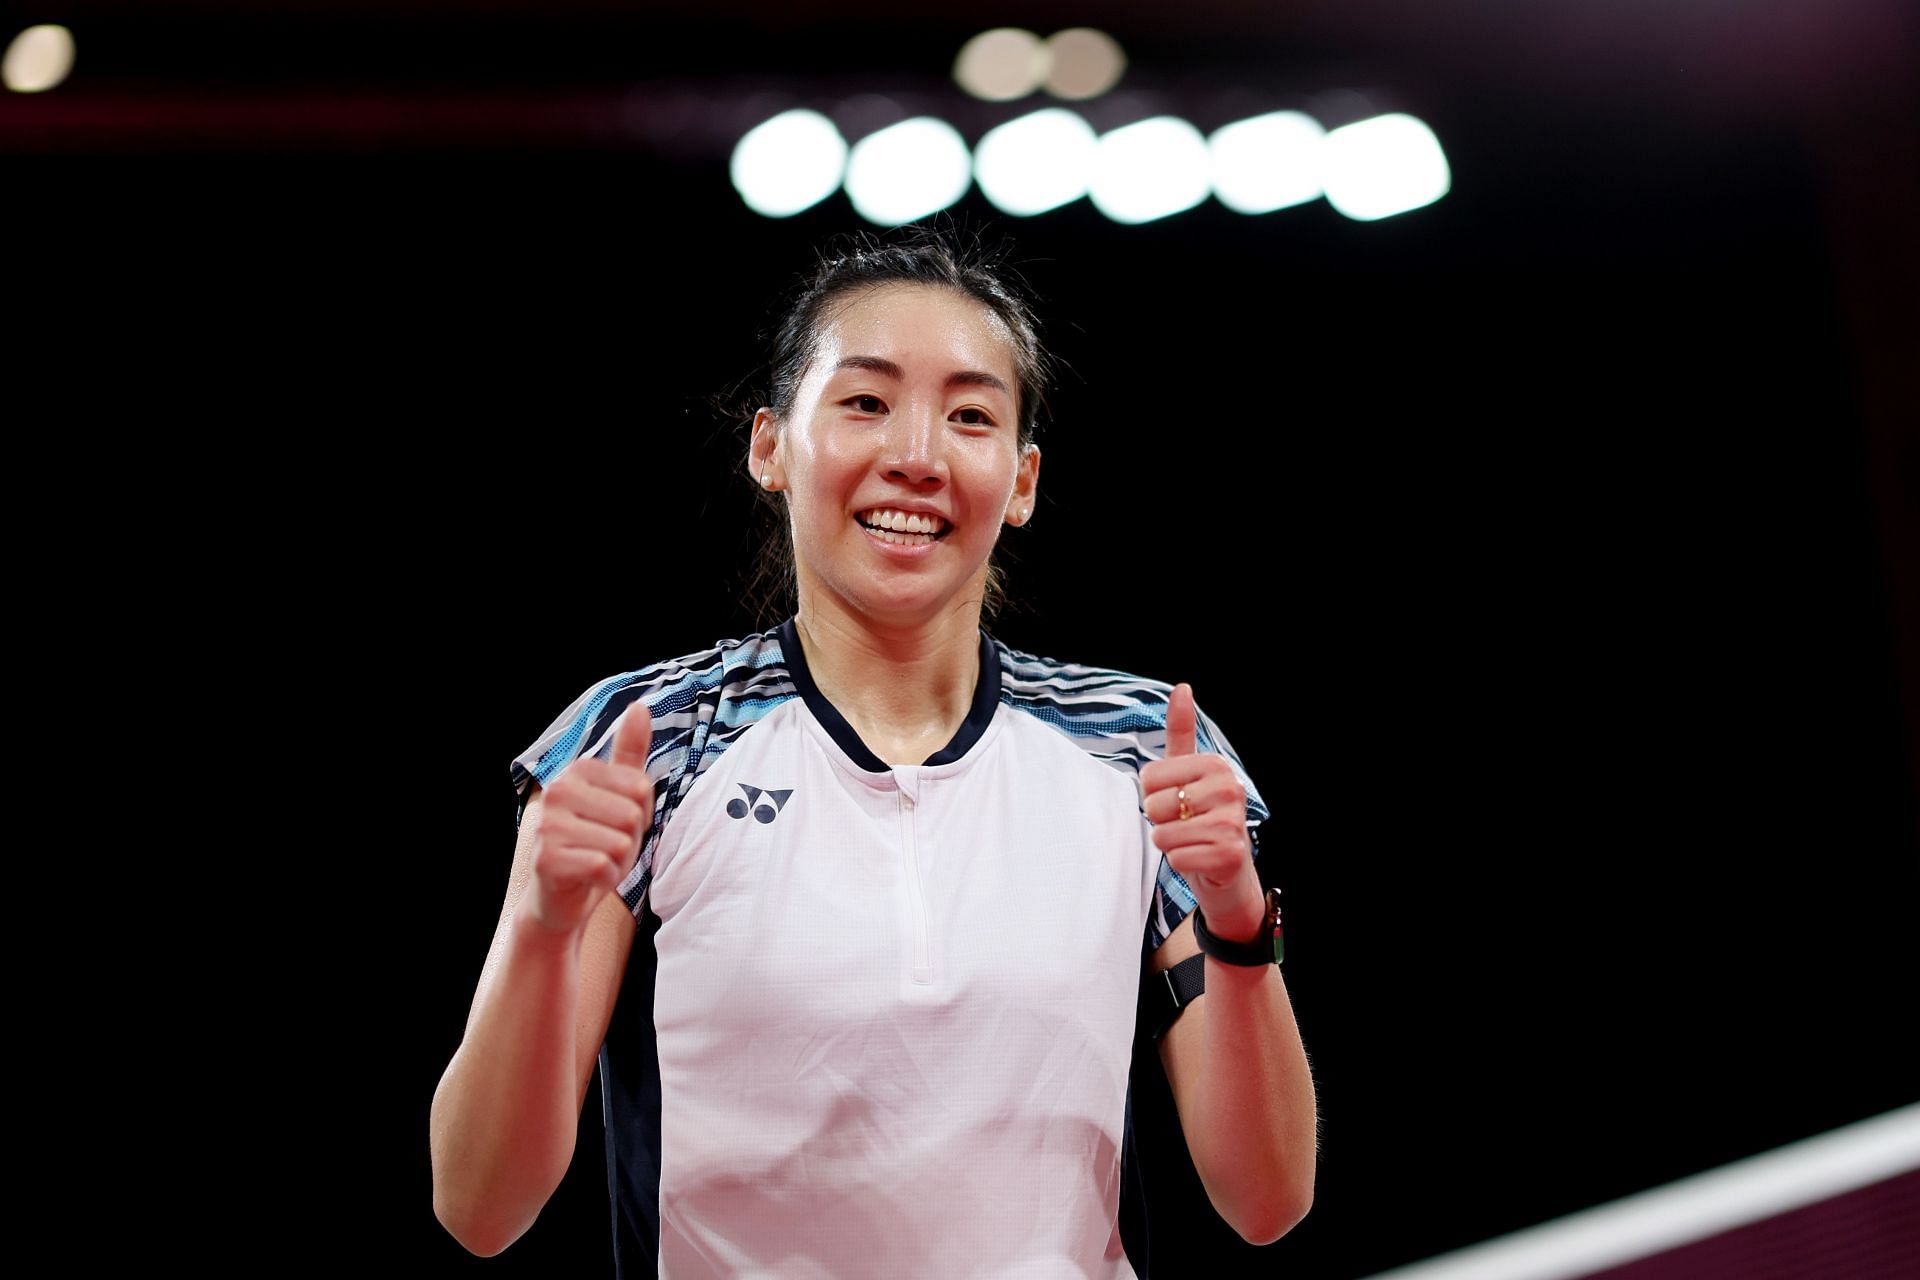 Michelle Li at the 2022 Commonwealth Games (Image courtesy: Getty)